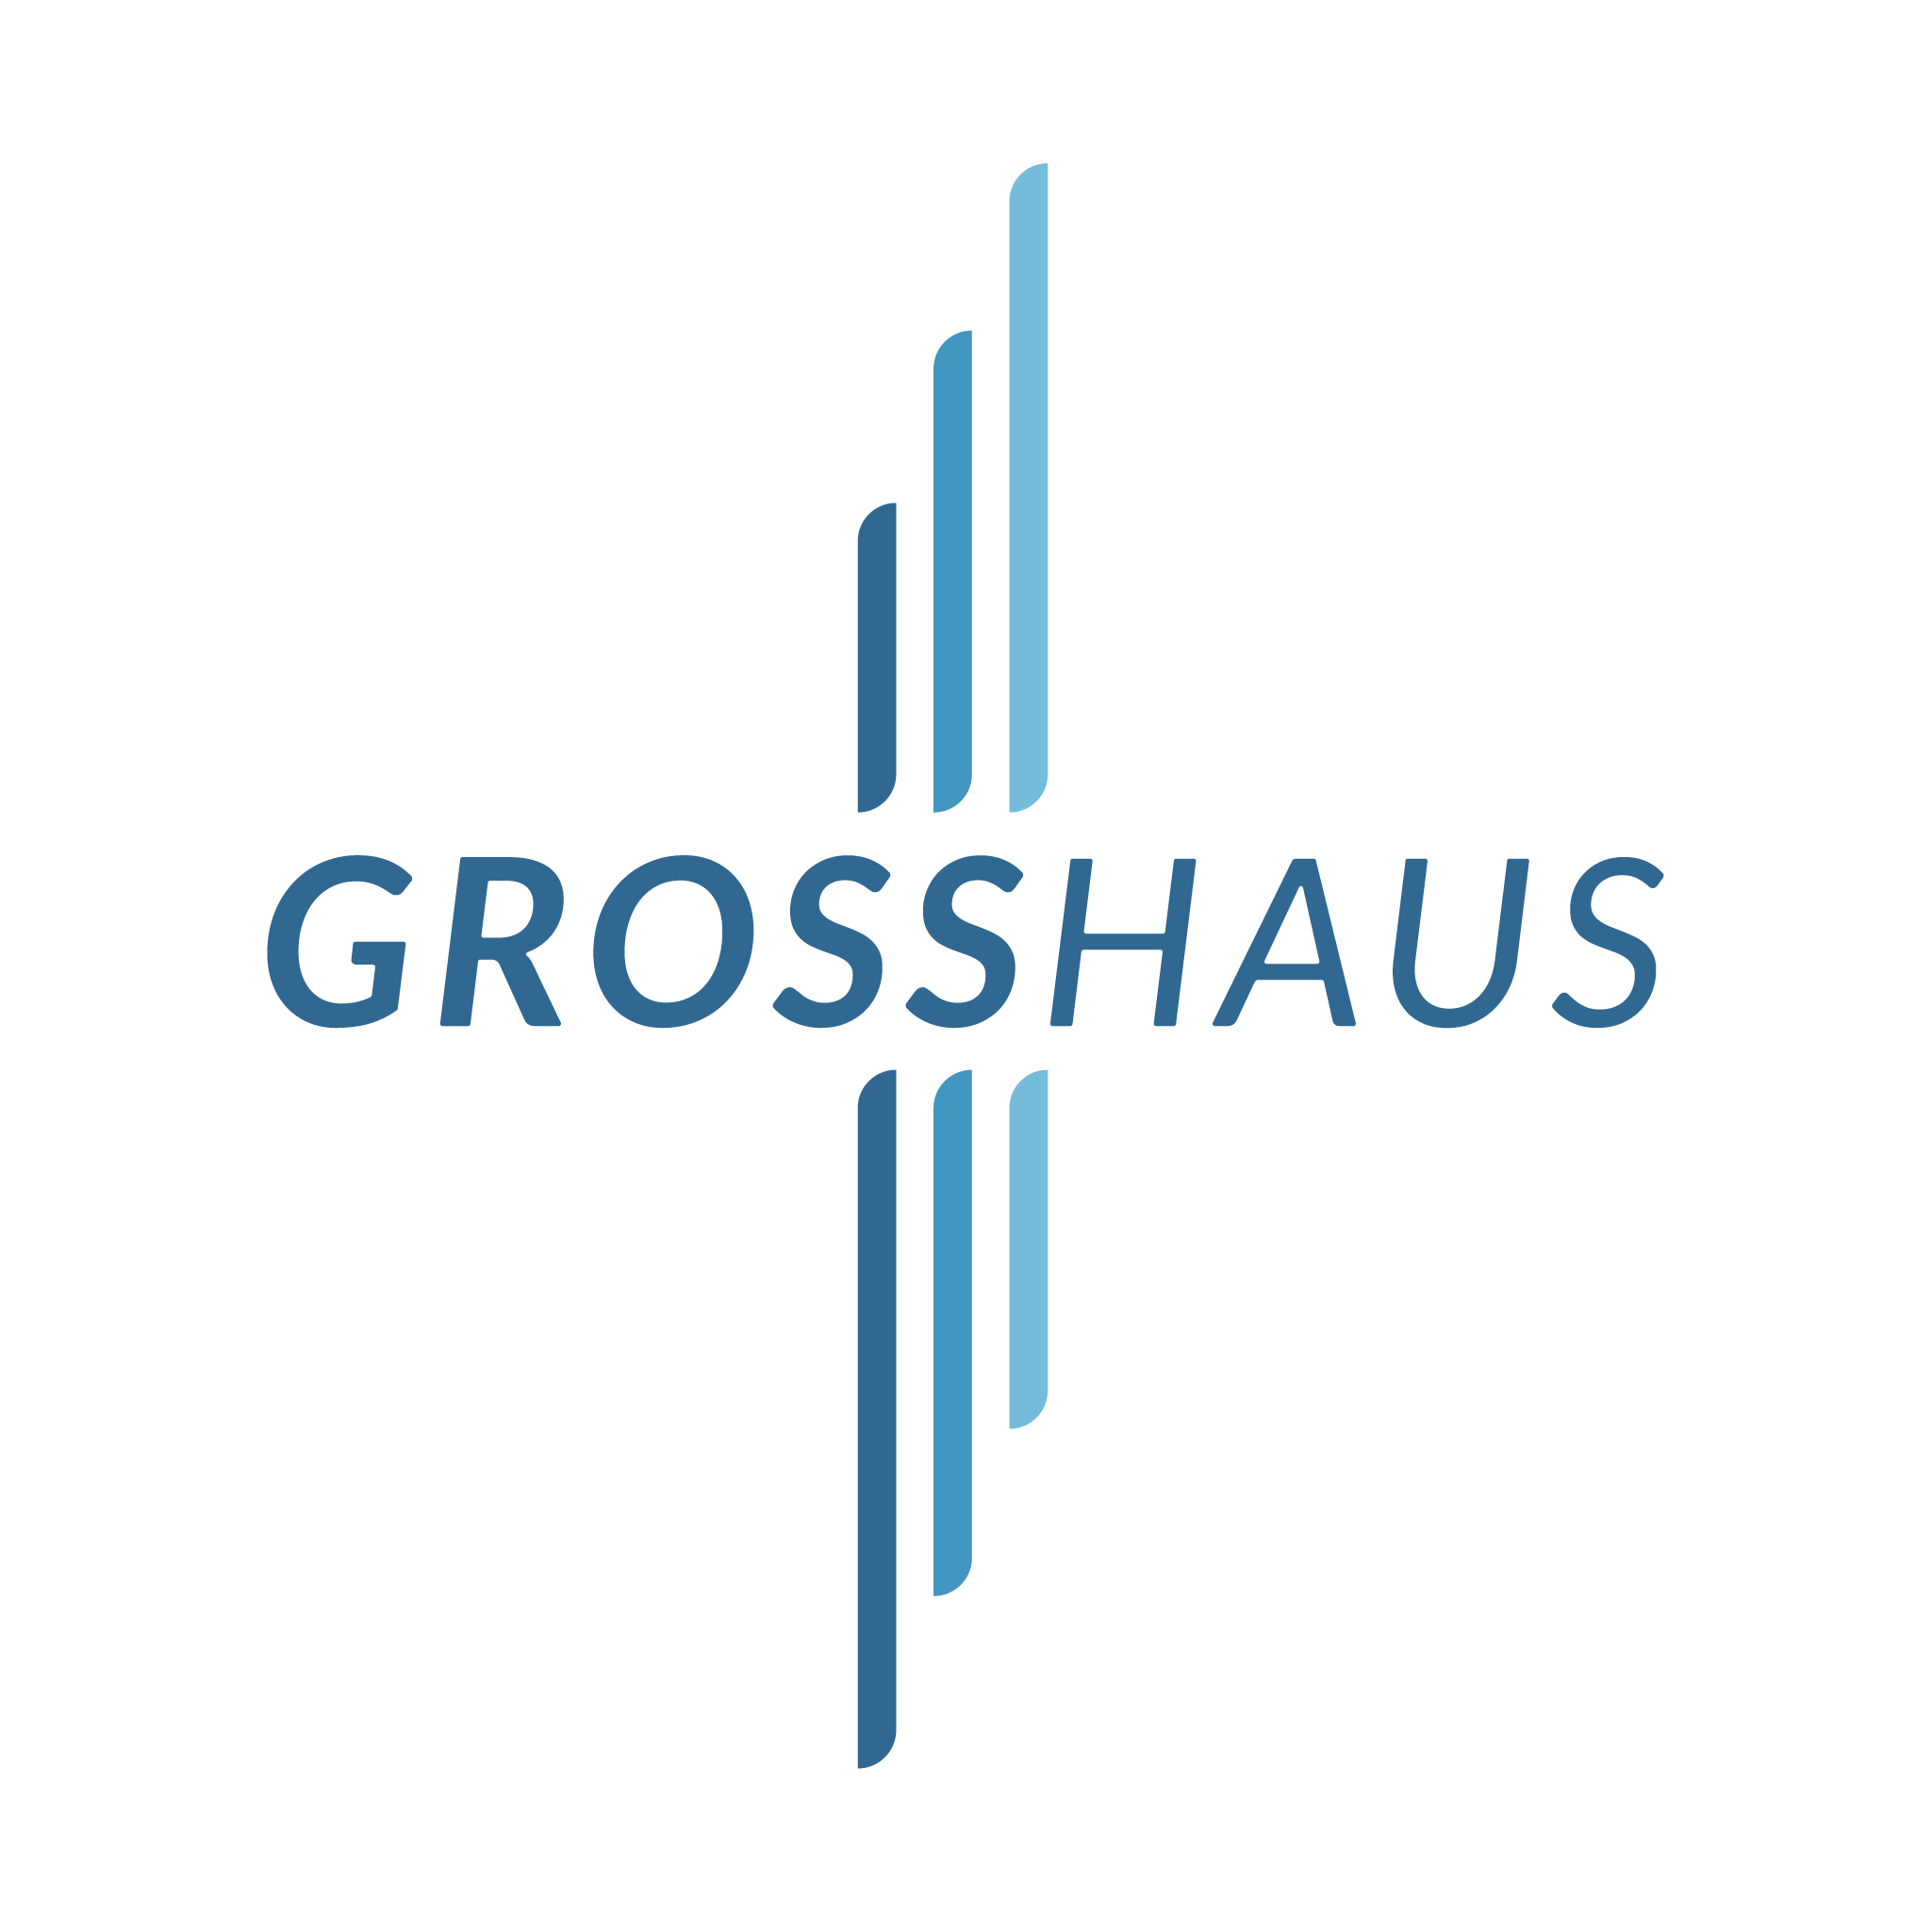 The new logo for Stiftung Grosshaus.